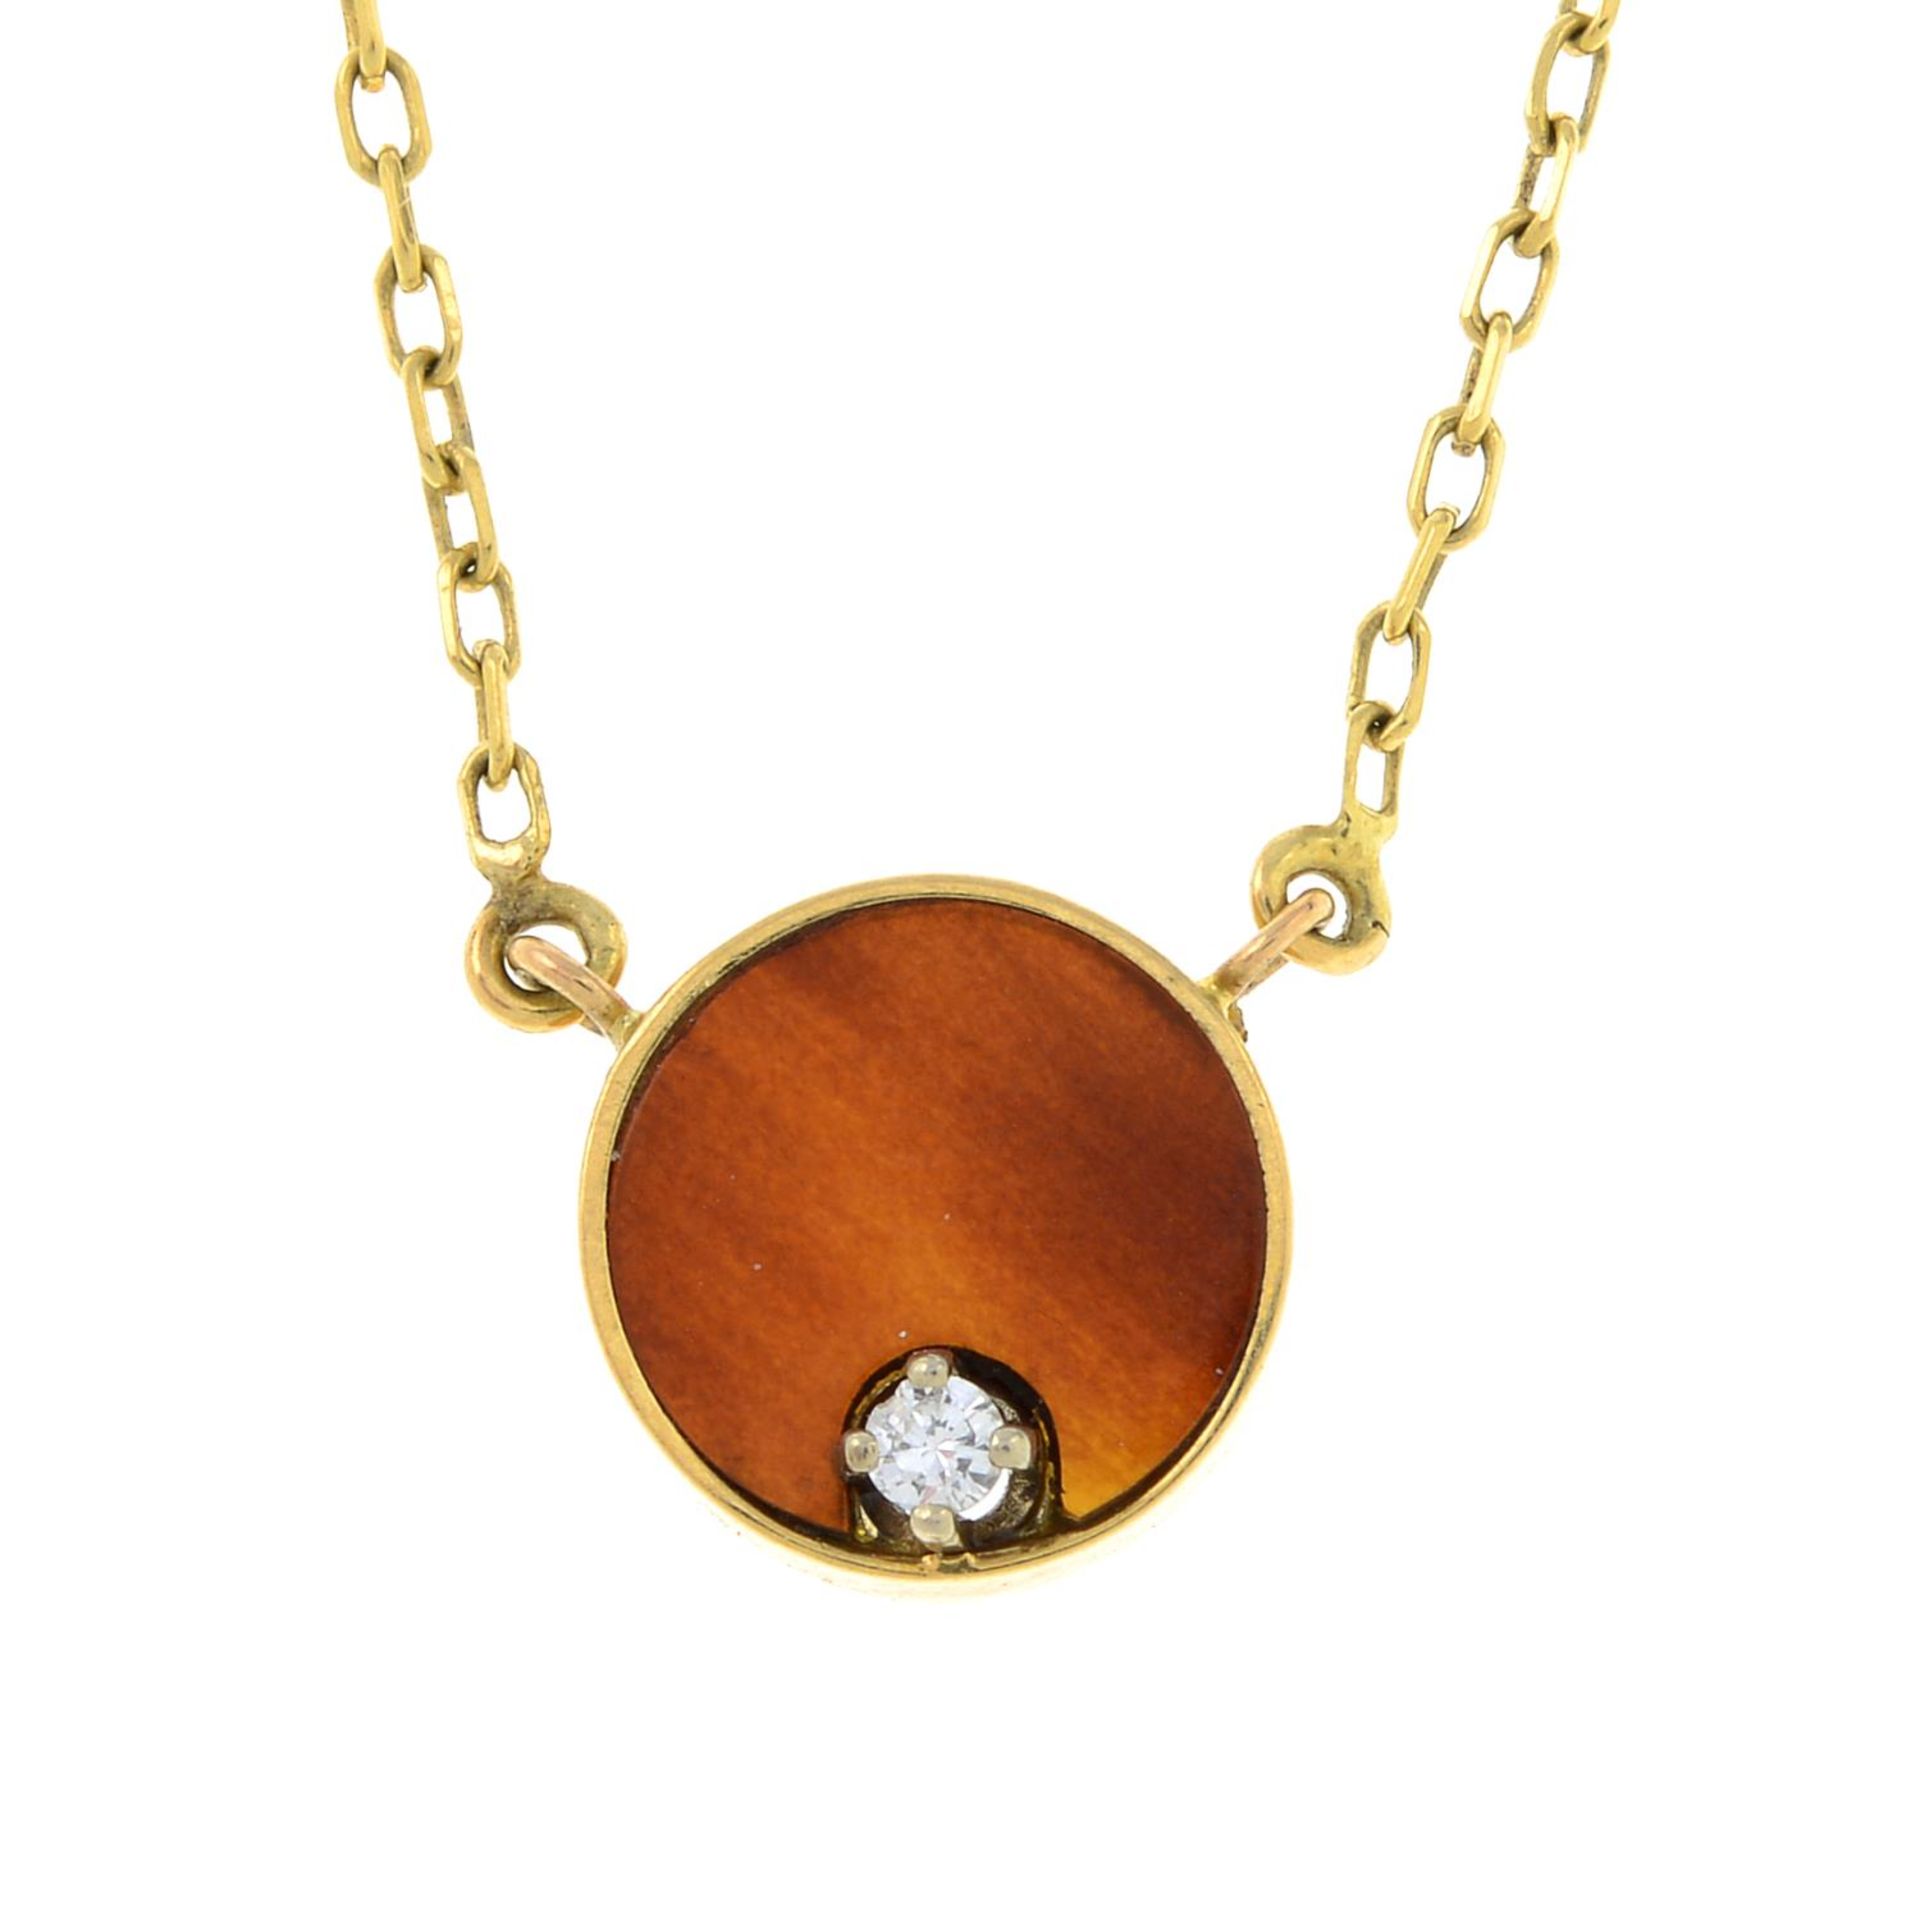 A carnelian and diamond pendant, on an integral trace-link chain.French assay marks.